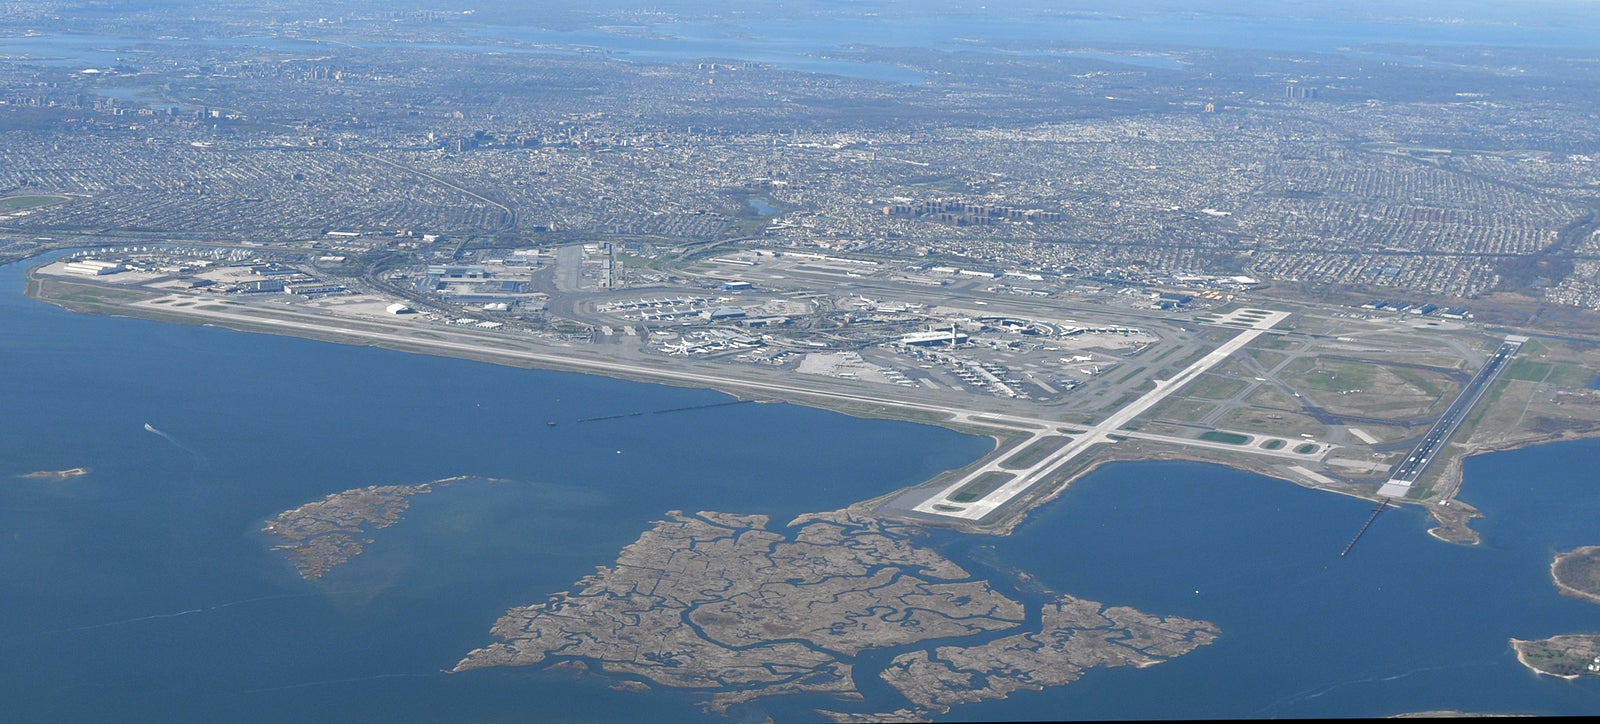 JFK overview from the air